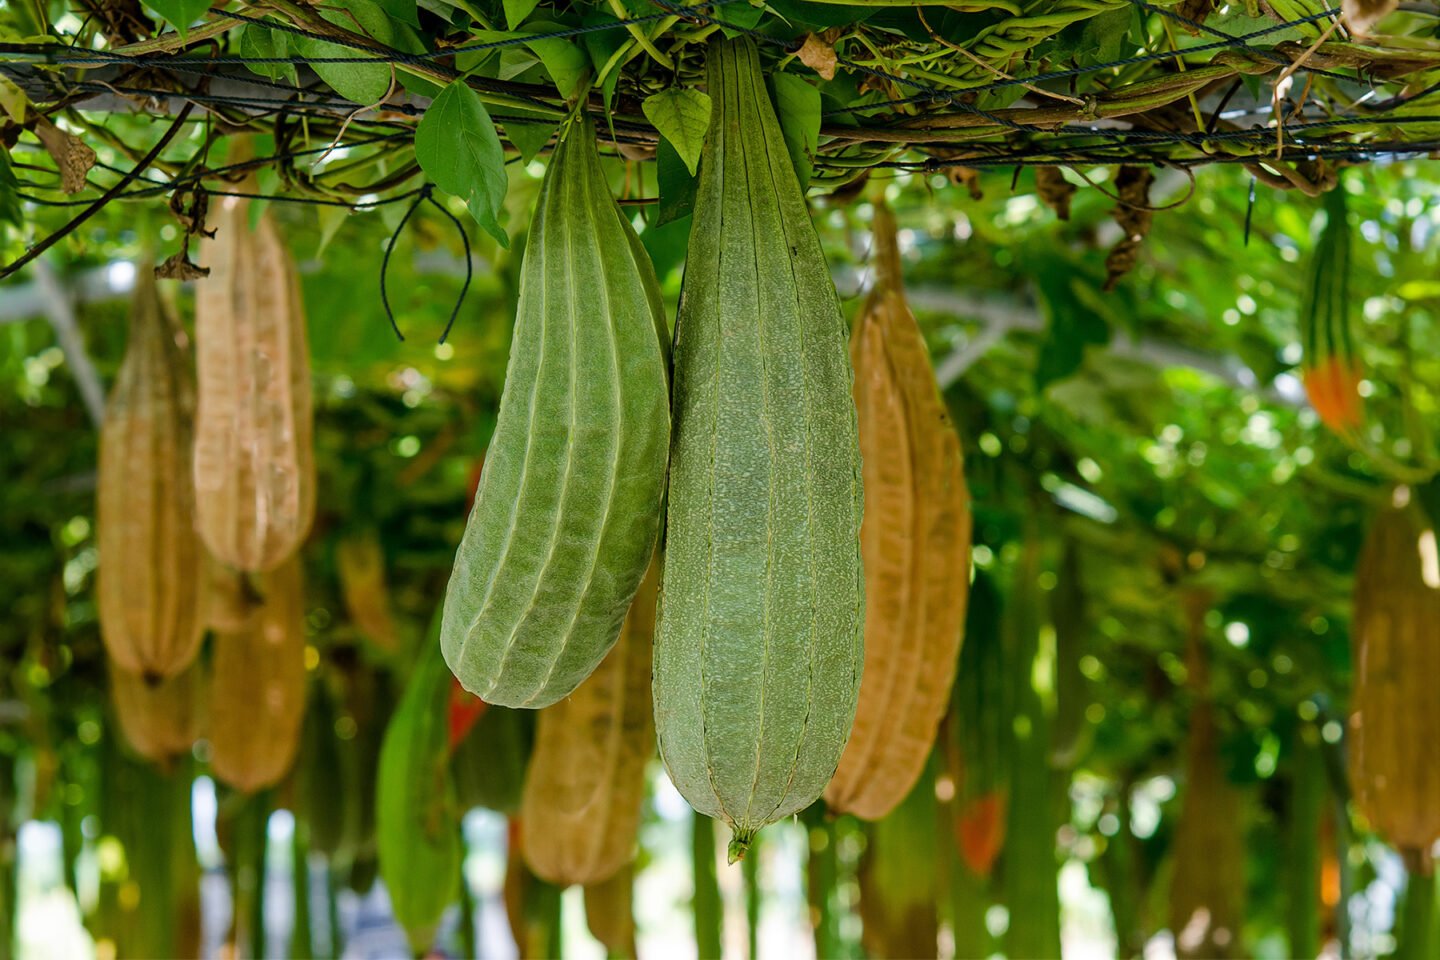 luffa sponge gourds hanging from vines